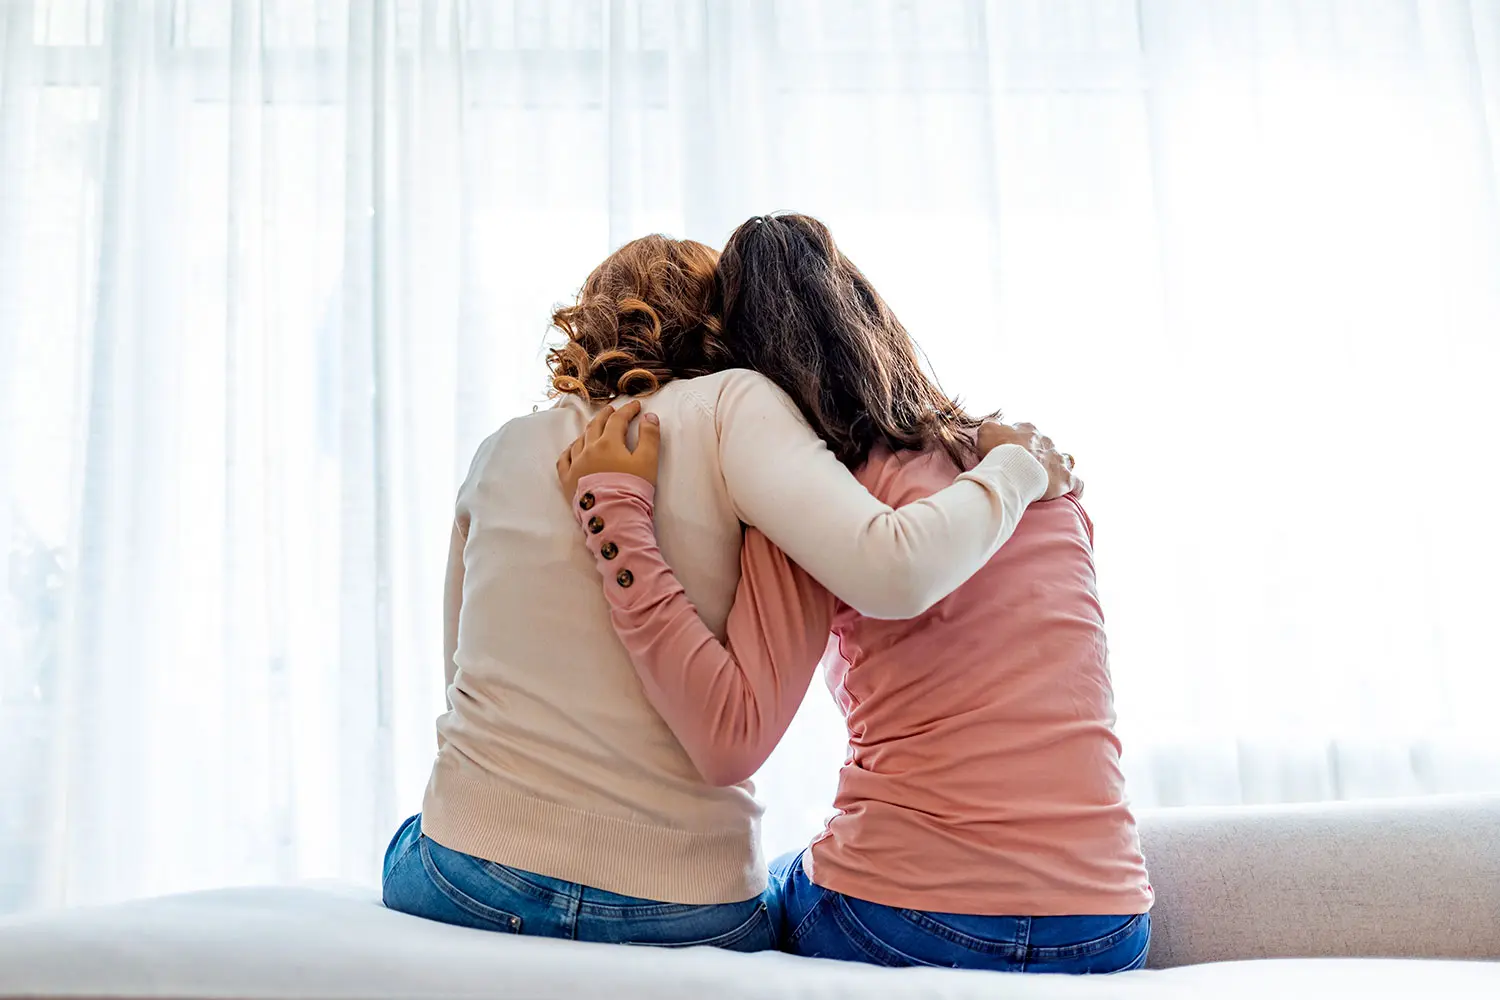 Teen daughter and mature mom from behind, sitting on bed embracing in support. AW518